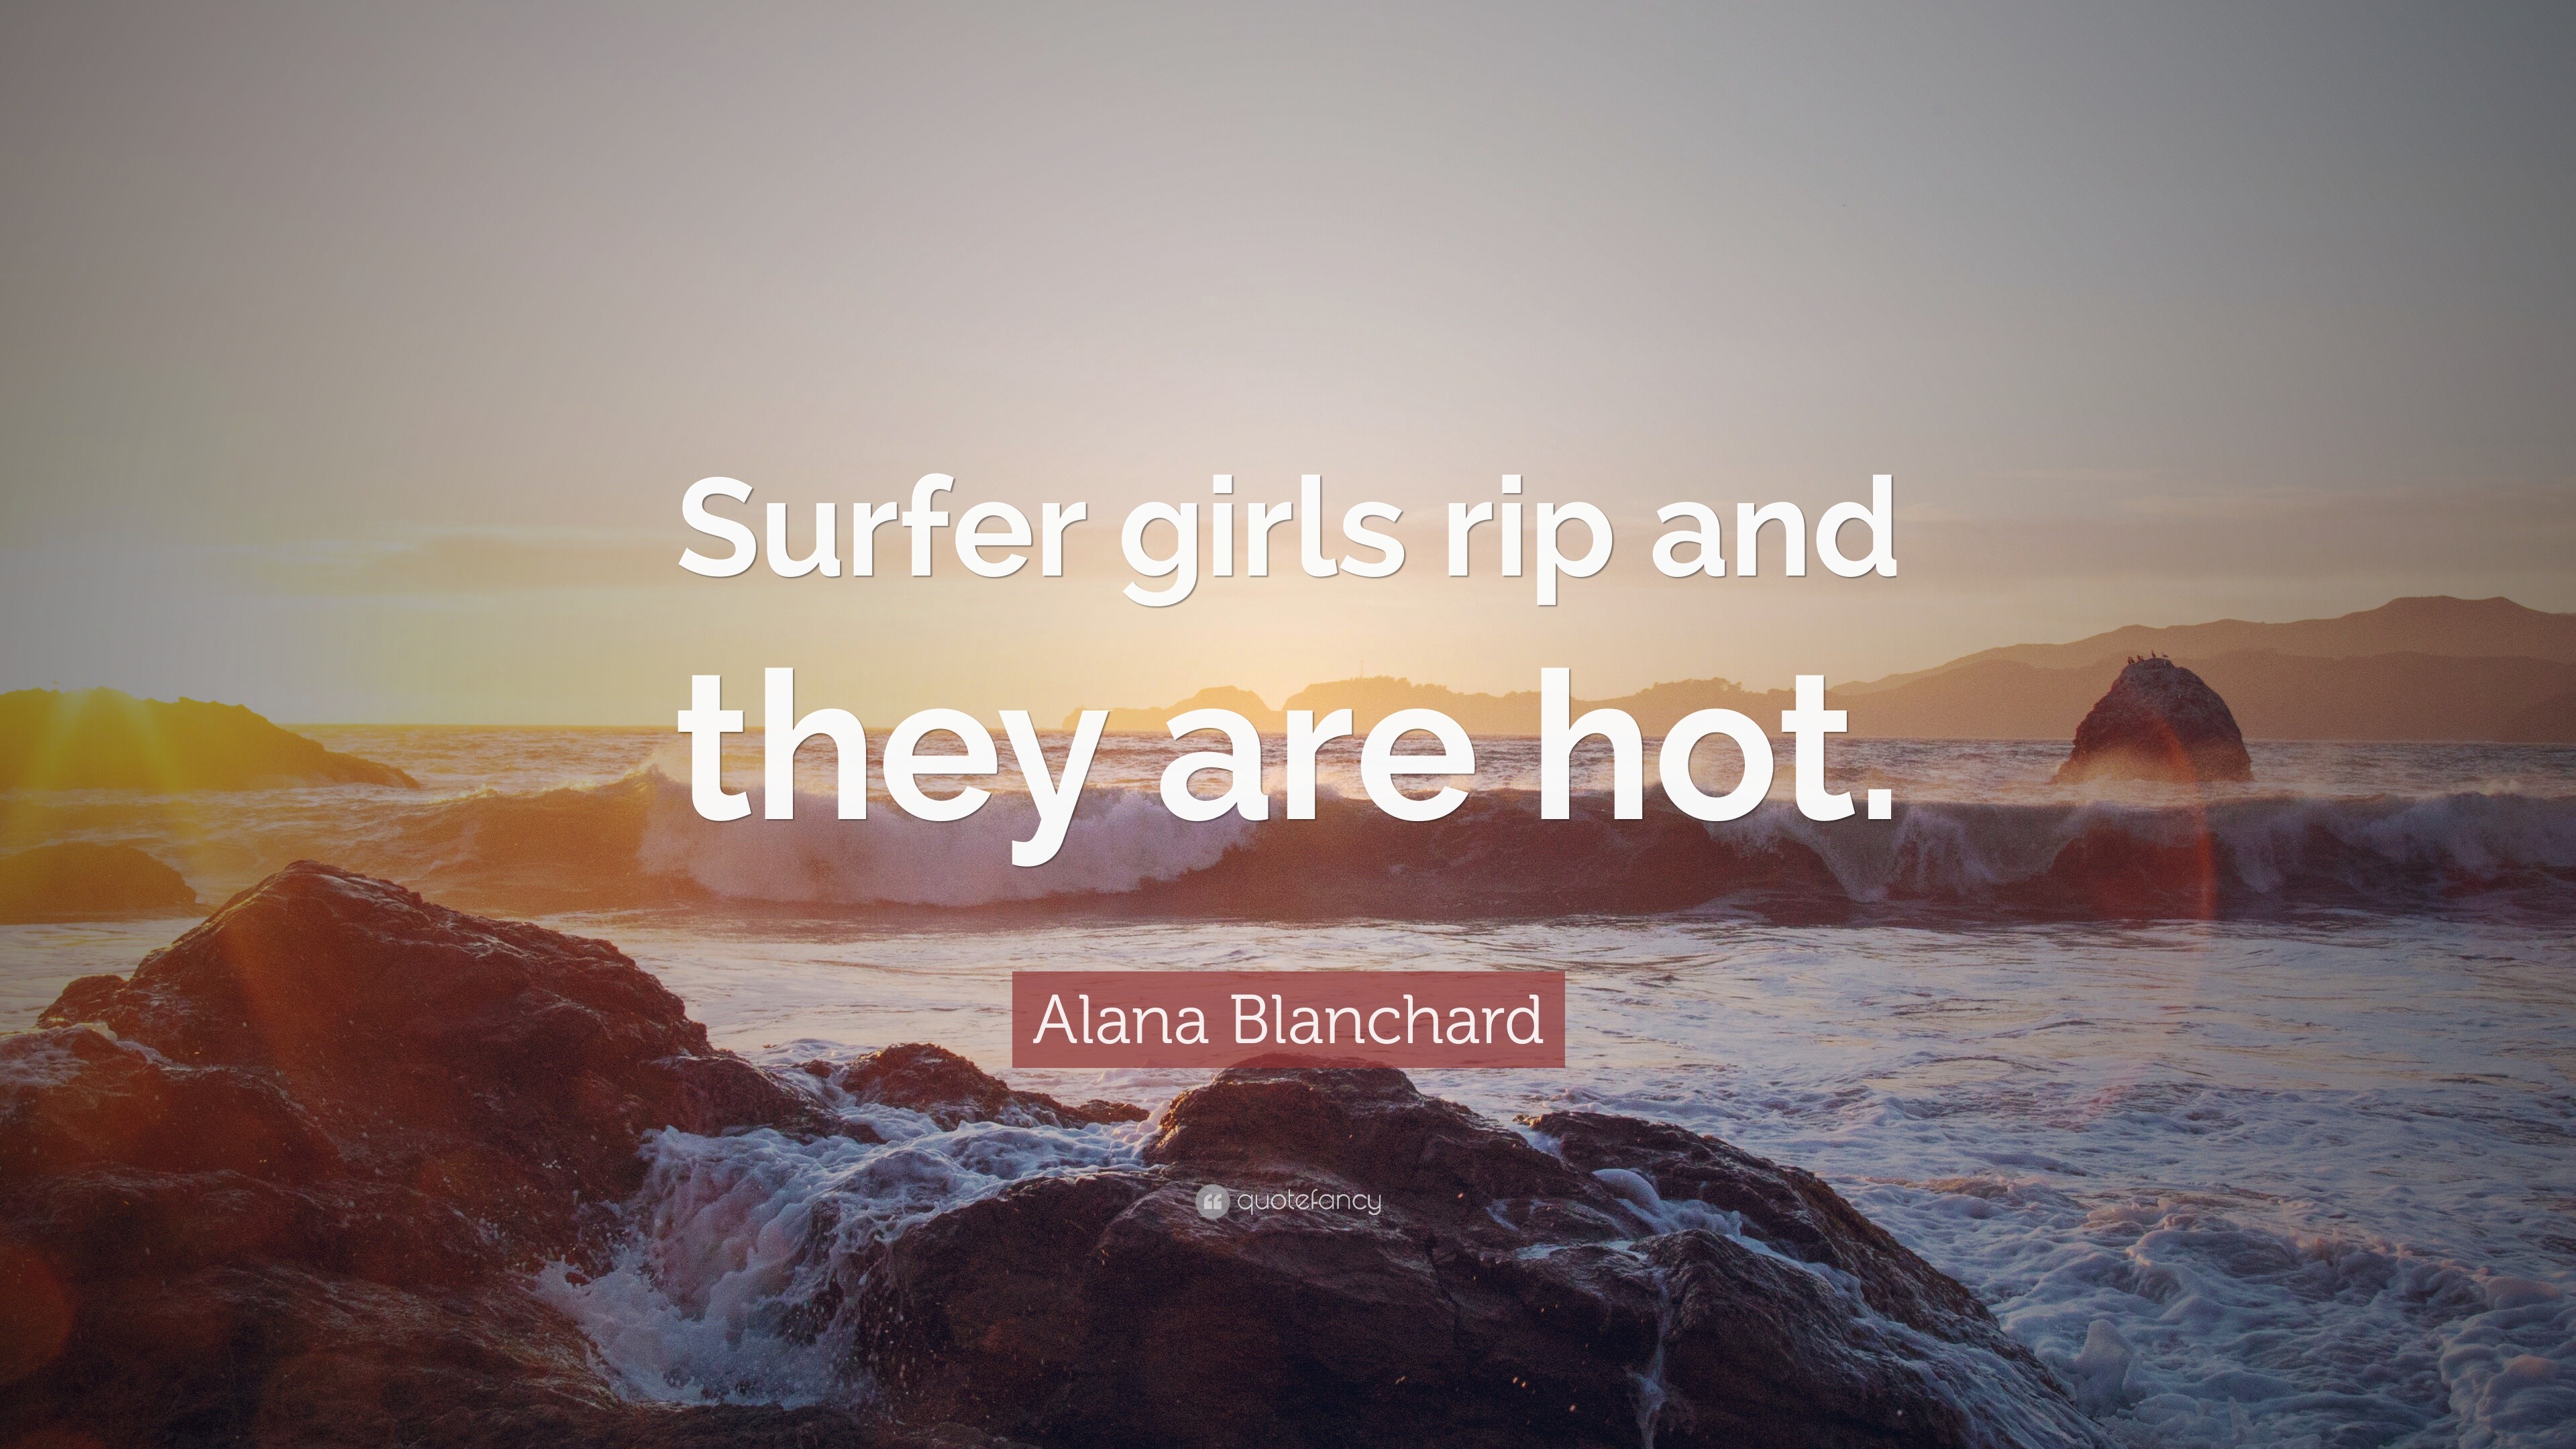 Alana Blanchard Quotes 6 Wallpapers Quotefancy Images, Photos, Reviews